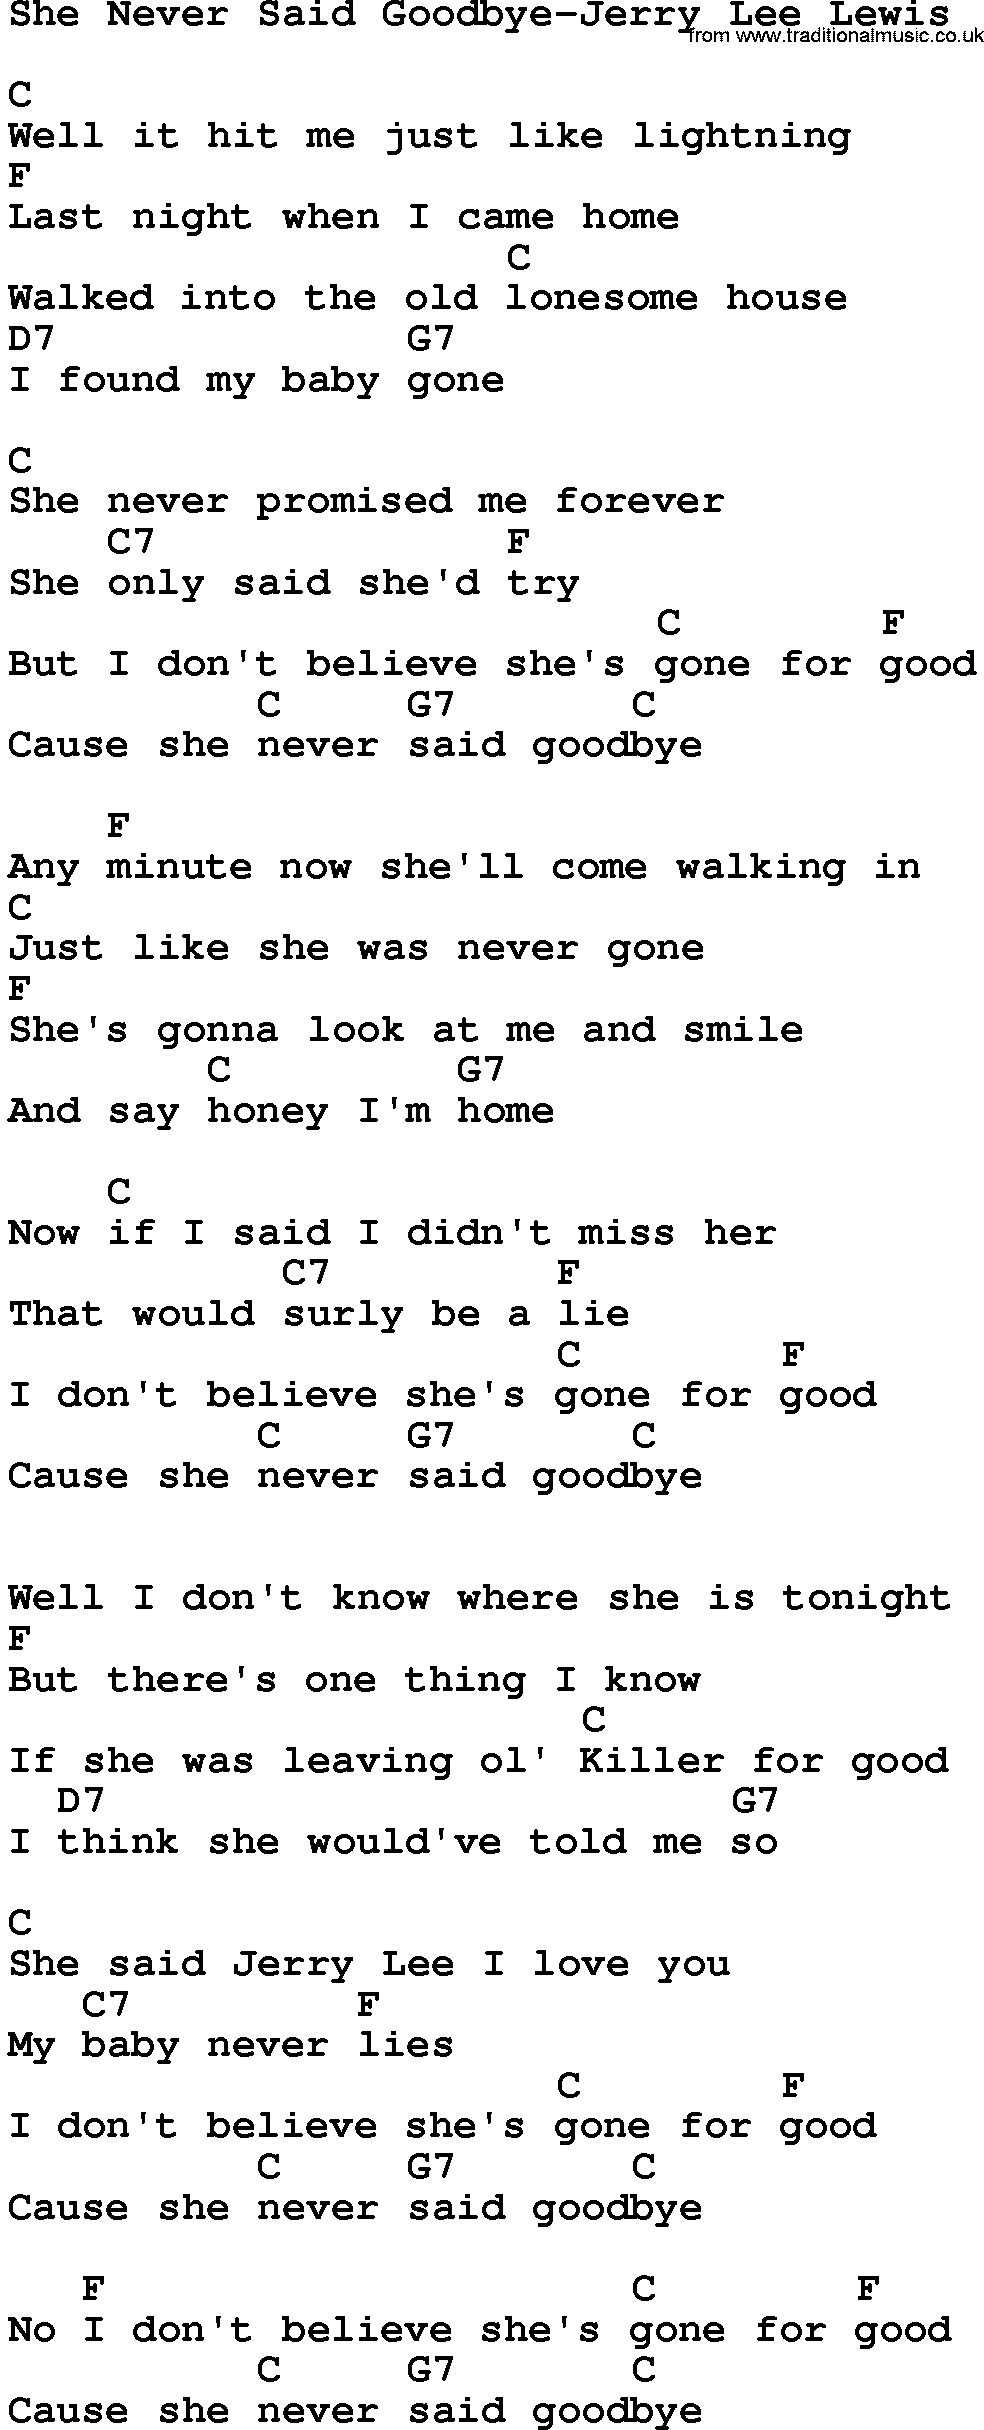 Country music song: She Never Said Goodbye-Jerry Lee Lewis lyrics and chords